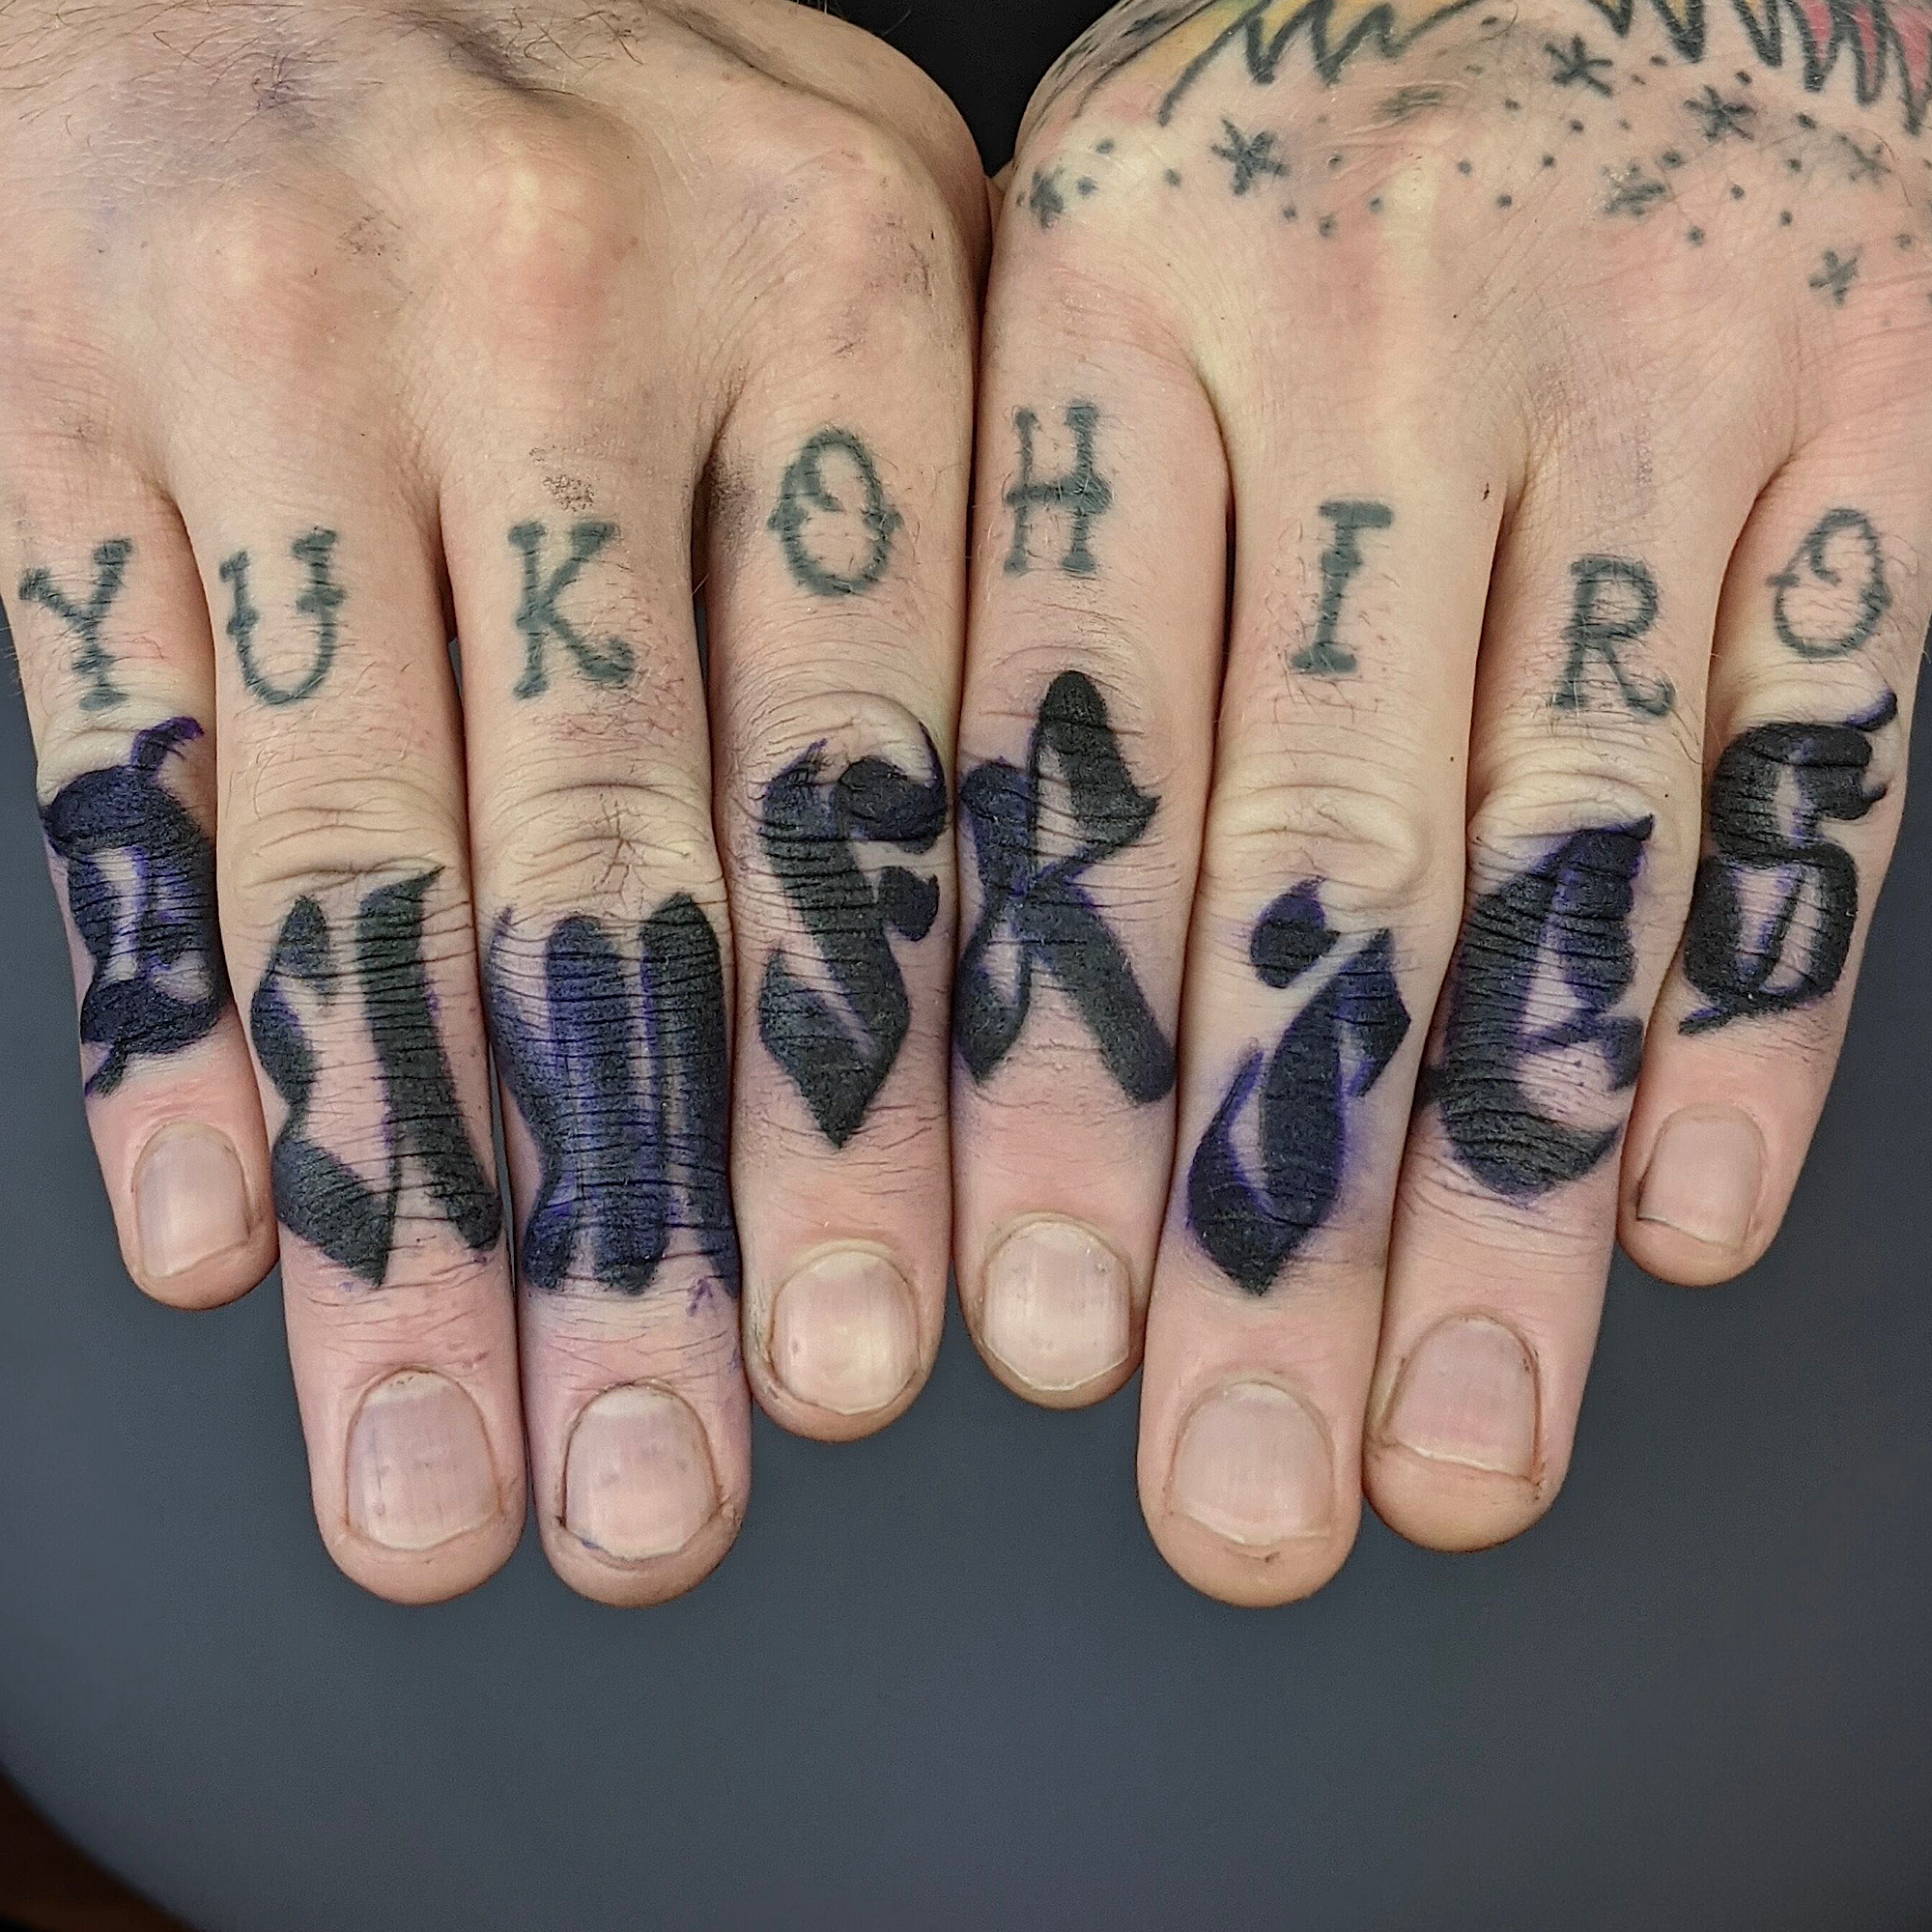 Blackletters old english style lettering dumfries across fingers love letters black and grey gray lettering hand tattoo by Ricks custom tattooing Ricardo Pedro at Nexus Collective